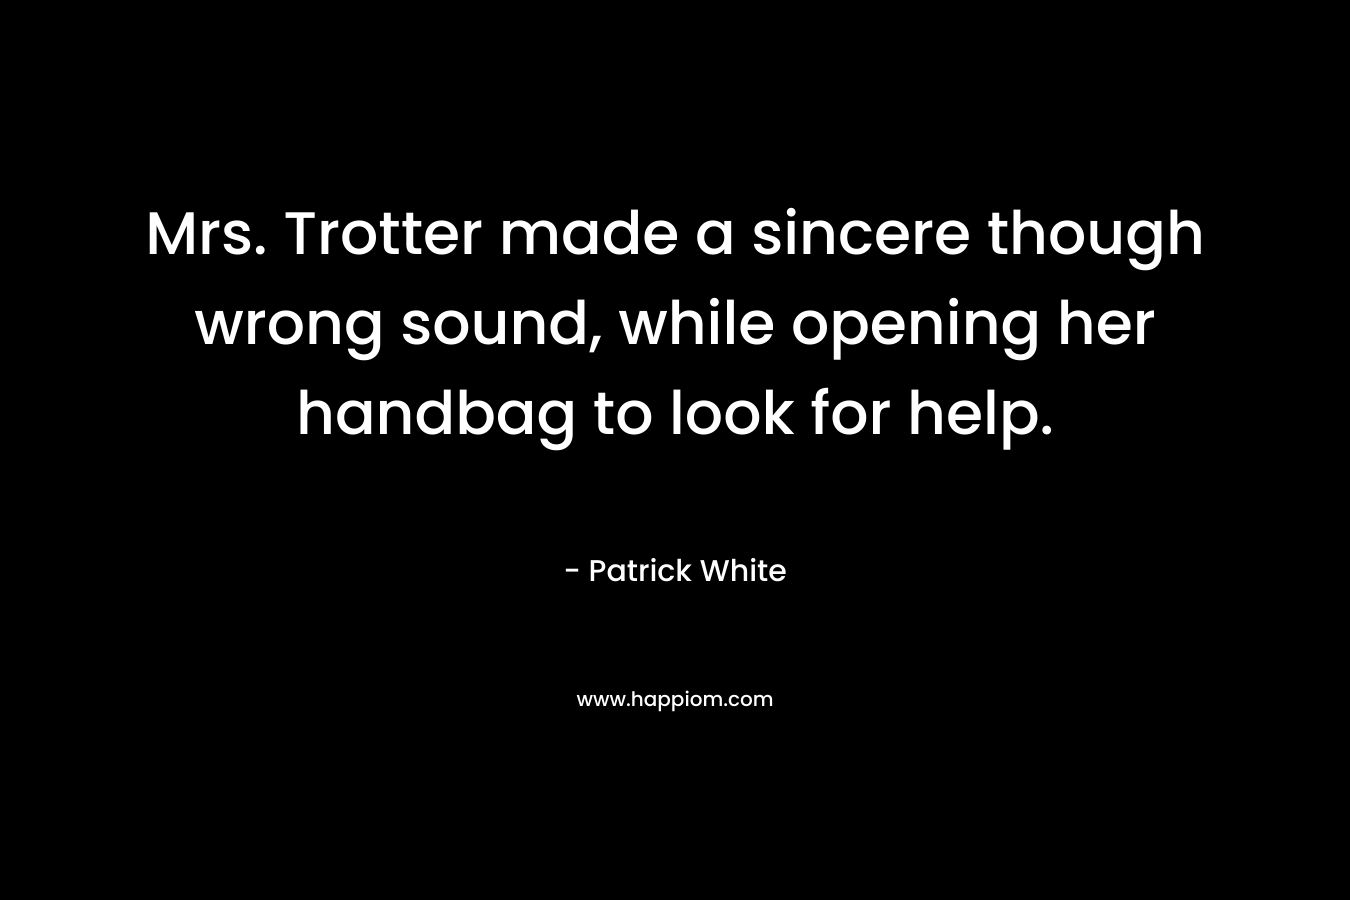 Mrs. Trotter made a sincere though wrong sound, while opening her handbag to look for help.